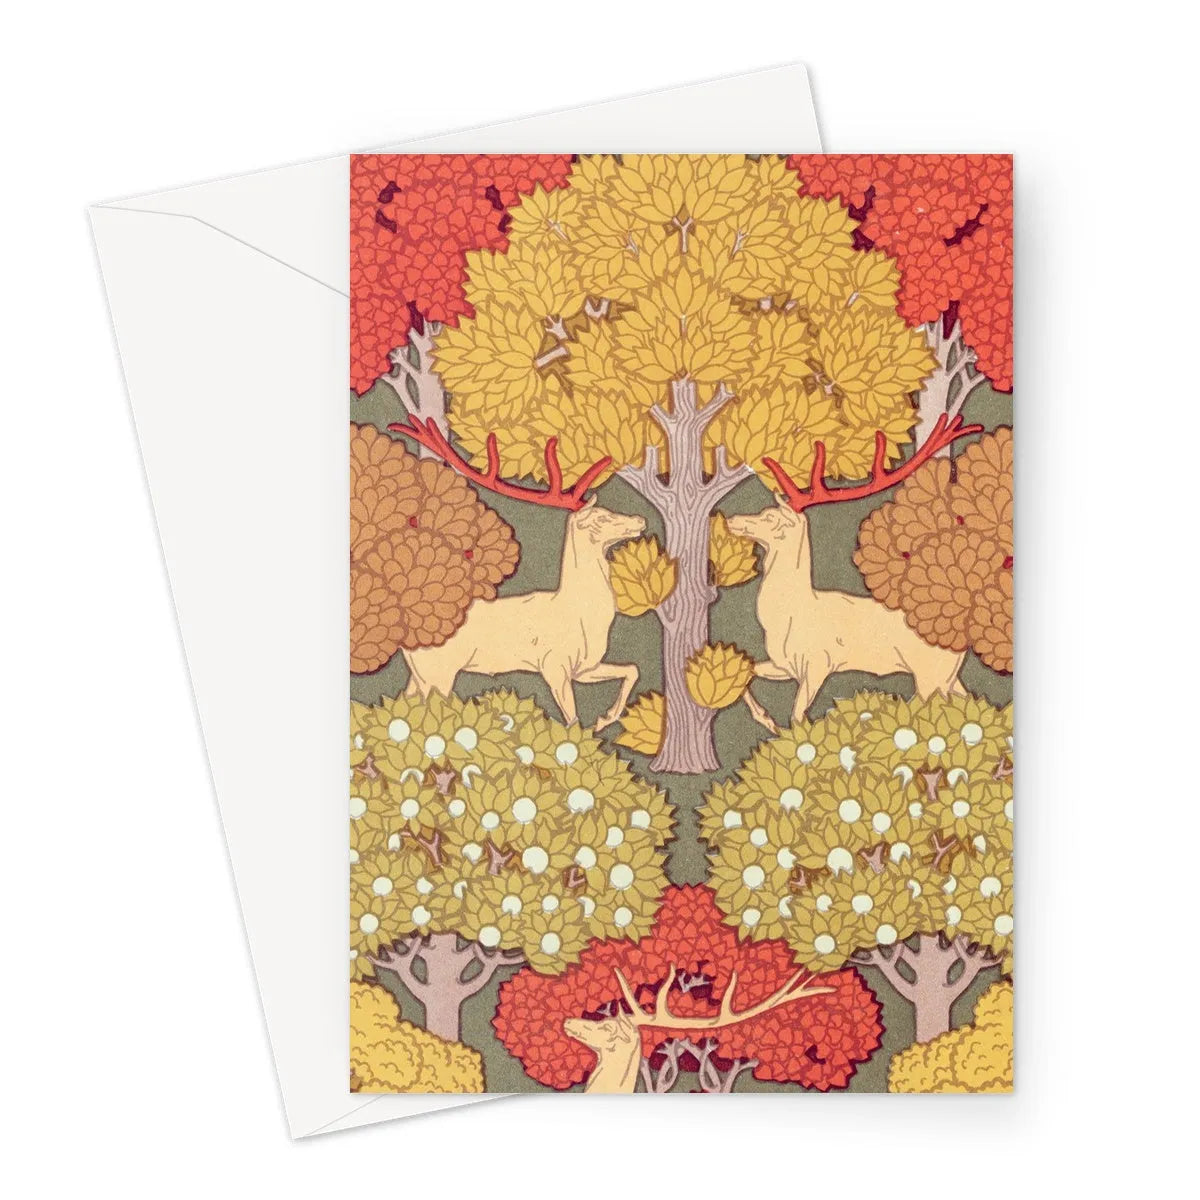 Cerfs Et Arbres By Maurice Pillard Verneuil Greeting Card - A5 Portrait / 1 Card - Greeting & Note Cards - Aesthetic Art